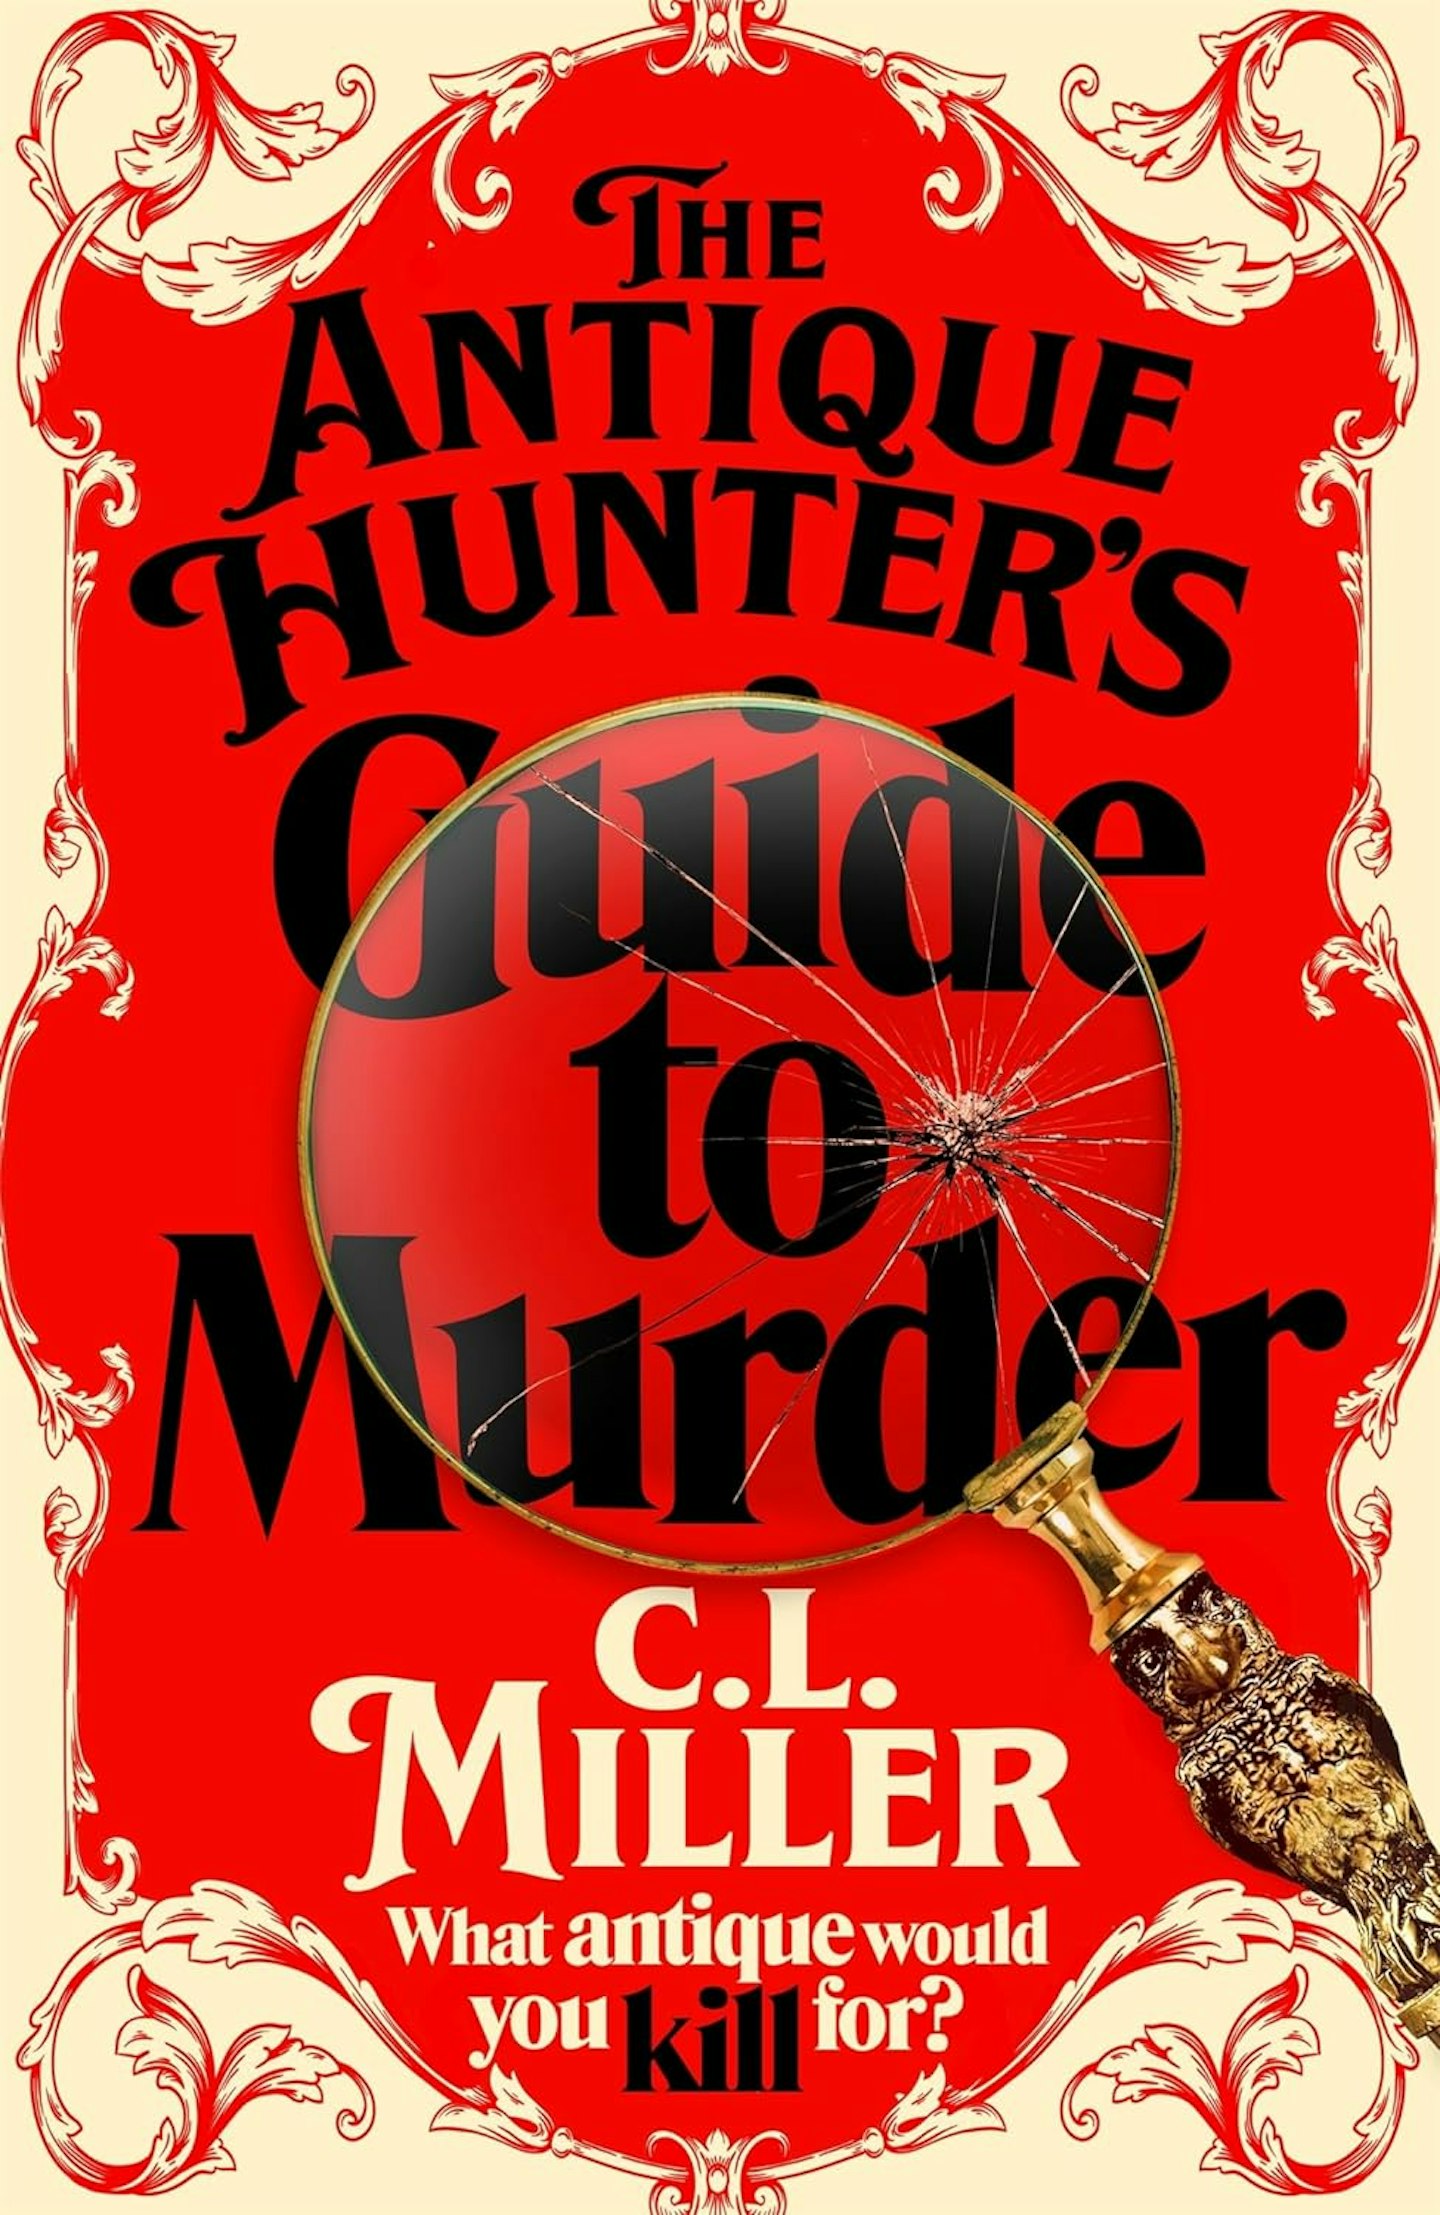 The Antique Hunter’s Guide to Murder book cover